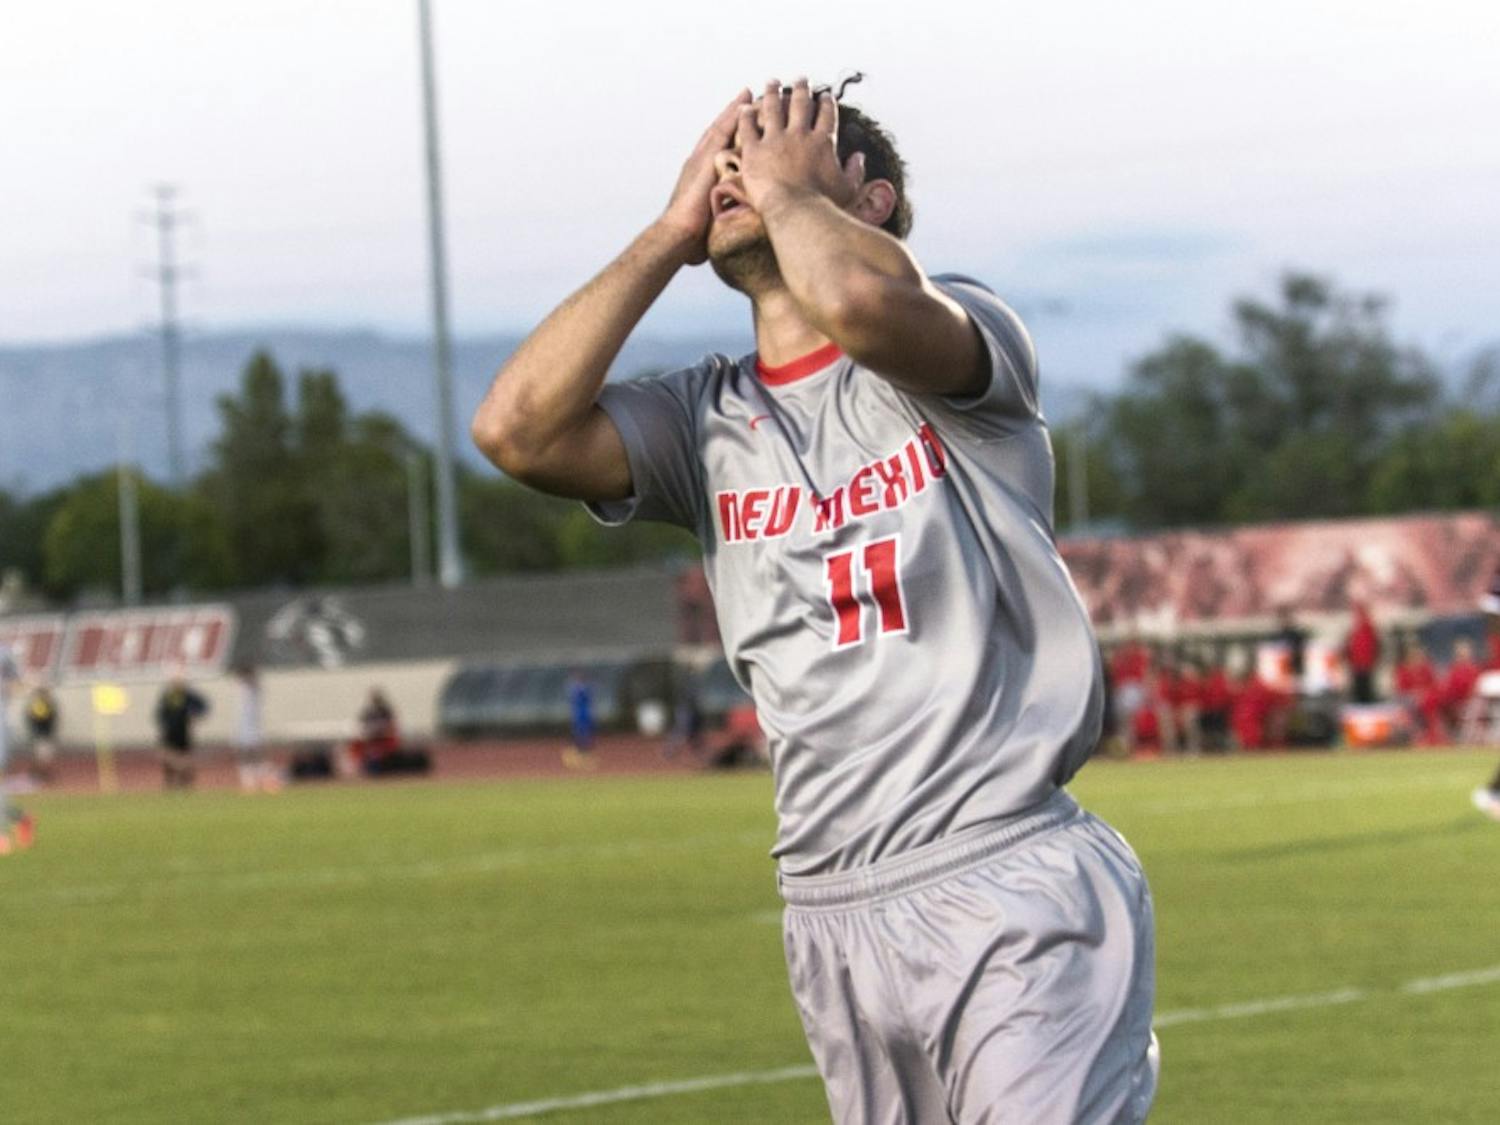 New Mexico midfielder Niko Hansen reacts after missing a goal attempt during the game against Missouri State on Oct. 12. The Lobos did not receive an at-large bid for this year’s NCAA Division I Men’s Soccer Championship and will miss the tournament for the first time since 2008.